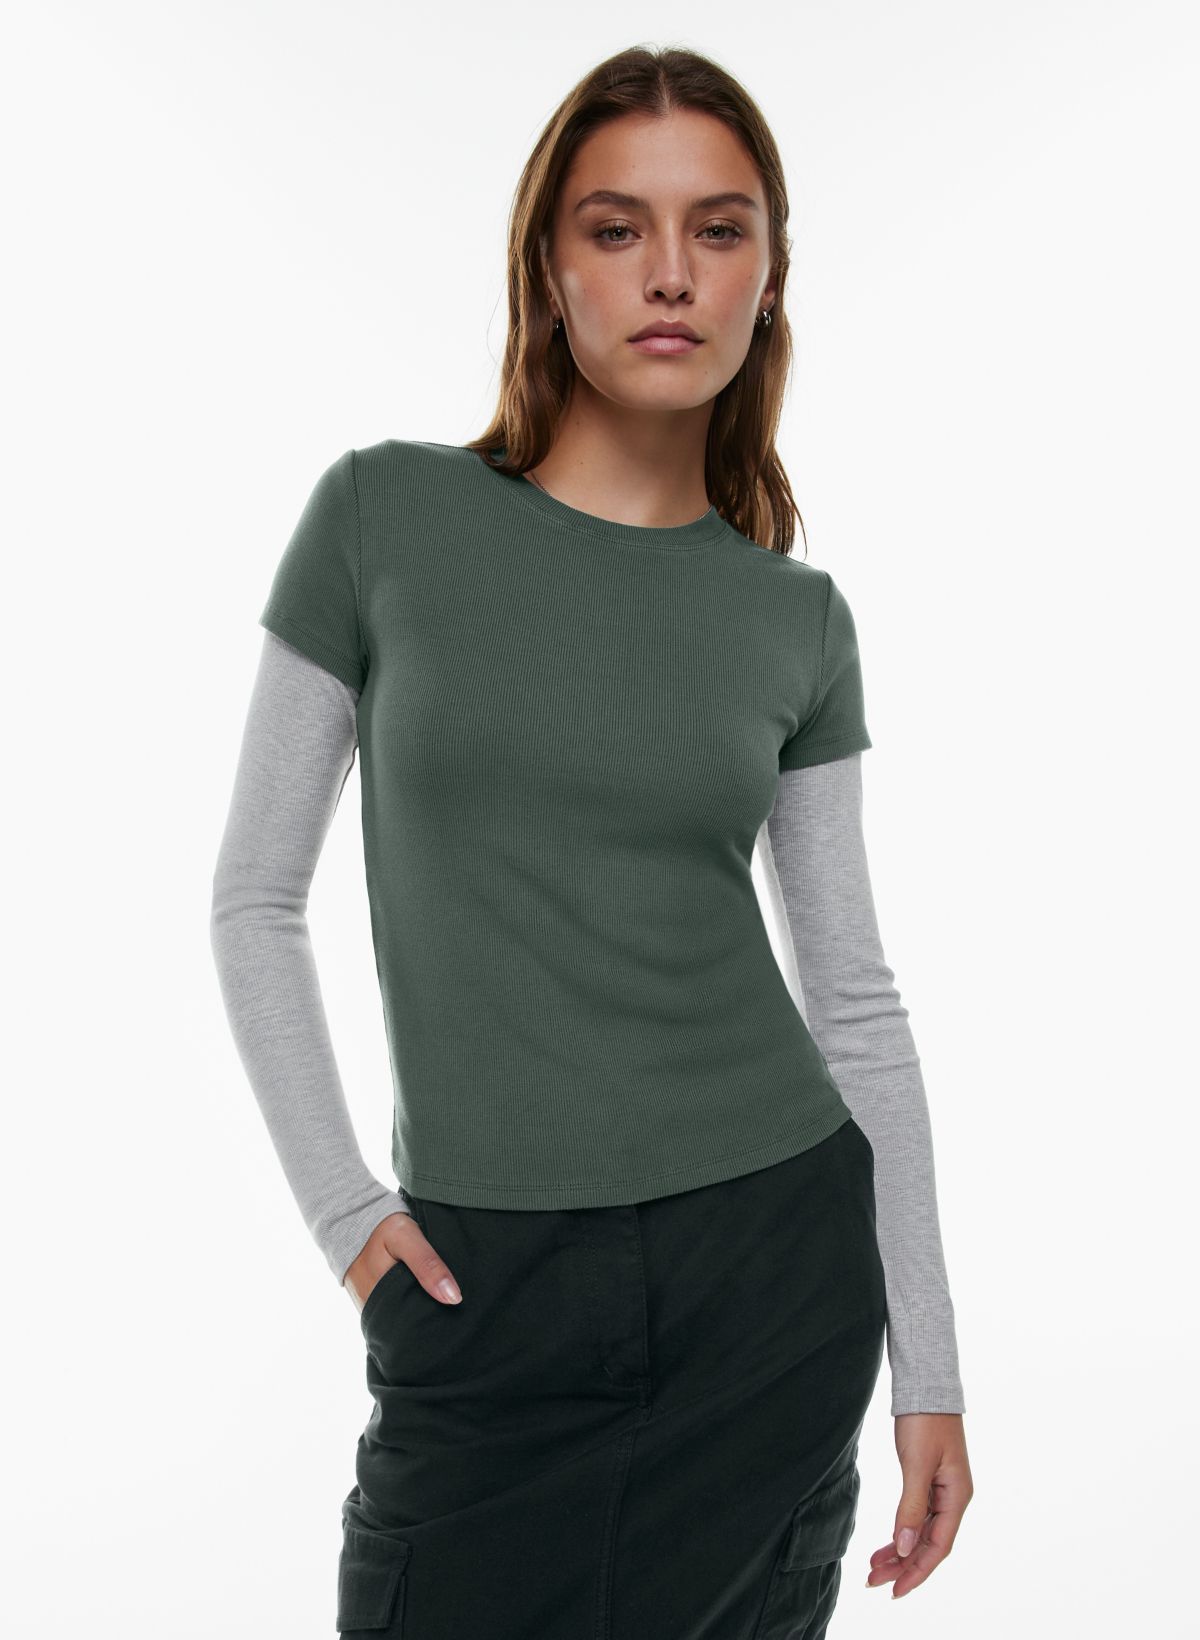 adidas Tops for Women - Sustainable Clothing - FARFETCH